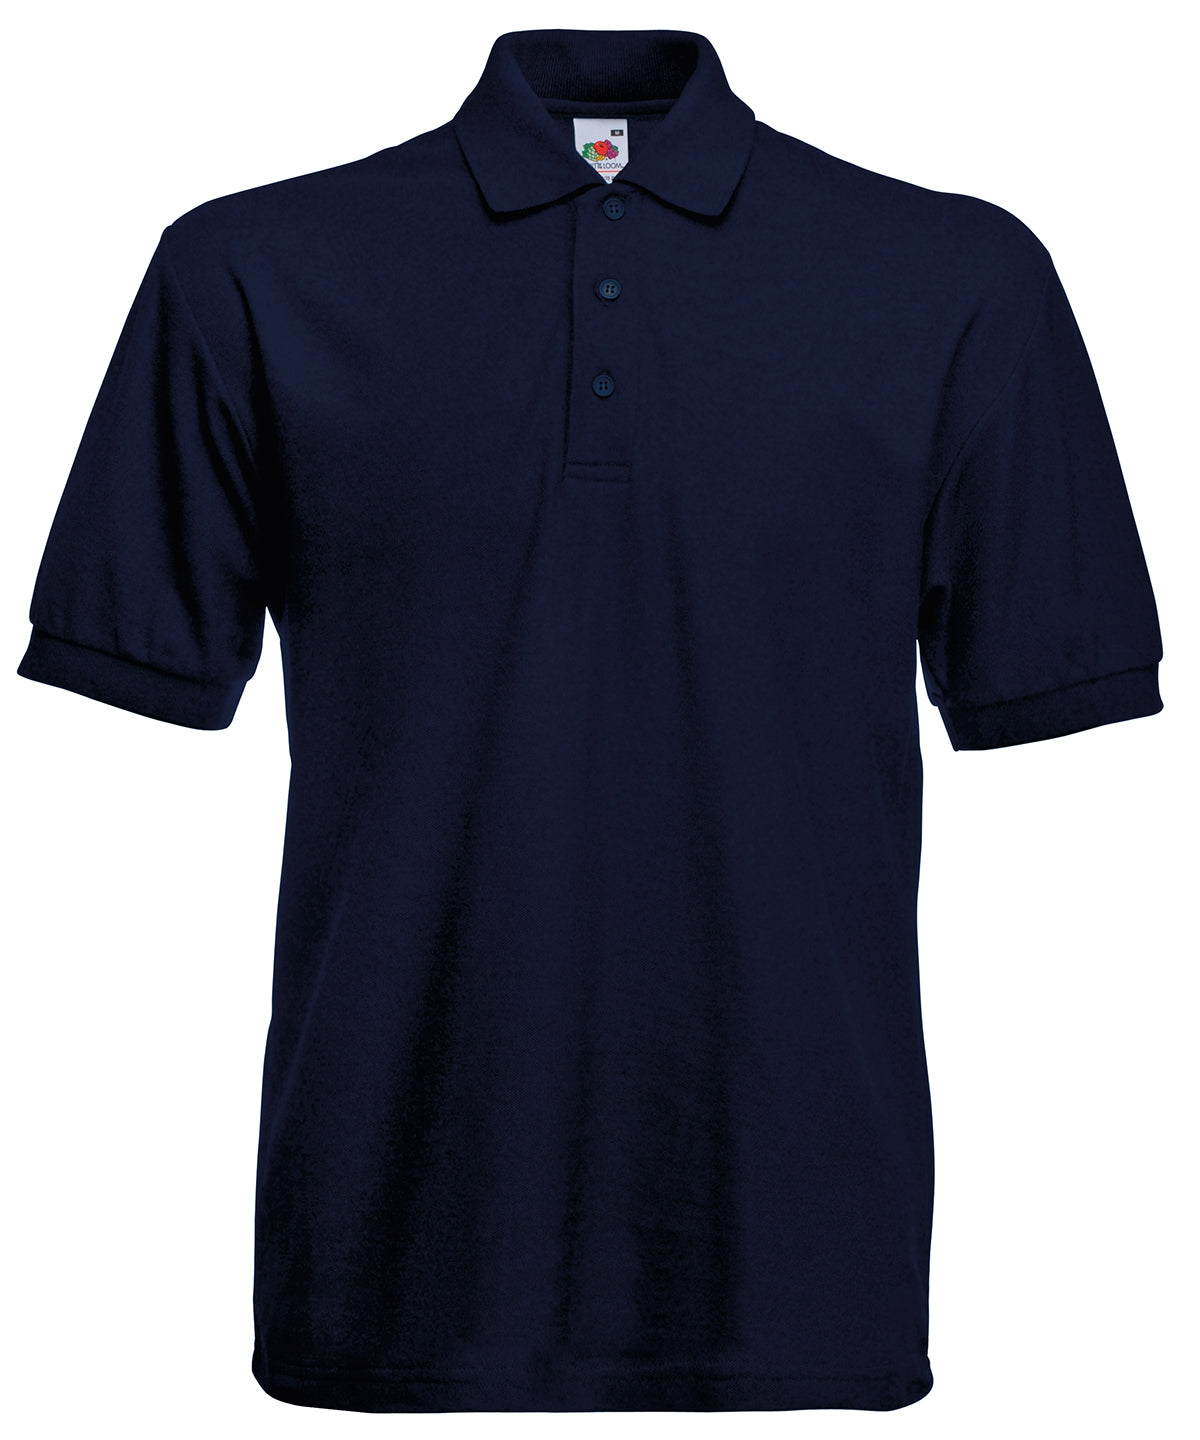 Personalised Polo Shirts - Black Fruit of the Loom Heavyweight 65/35 polo